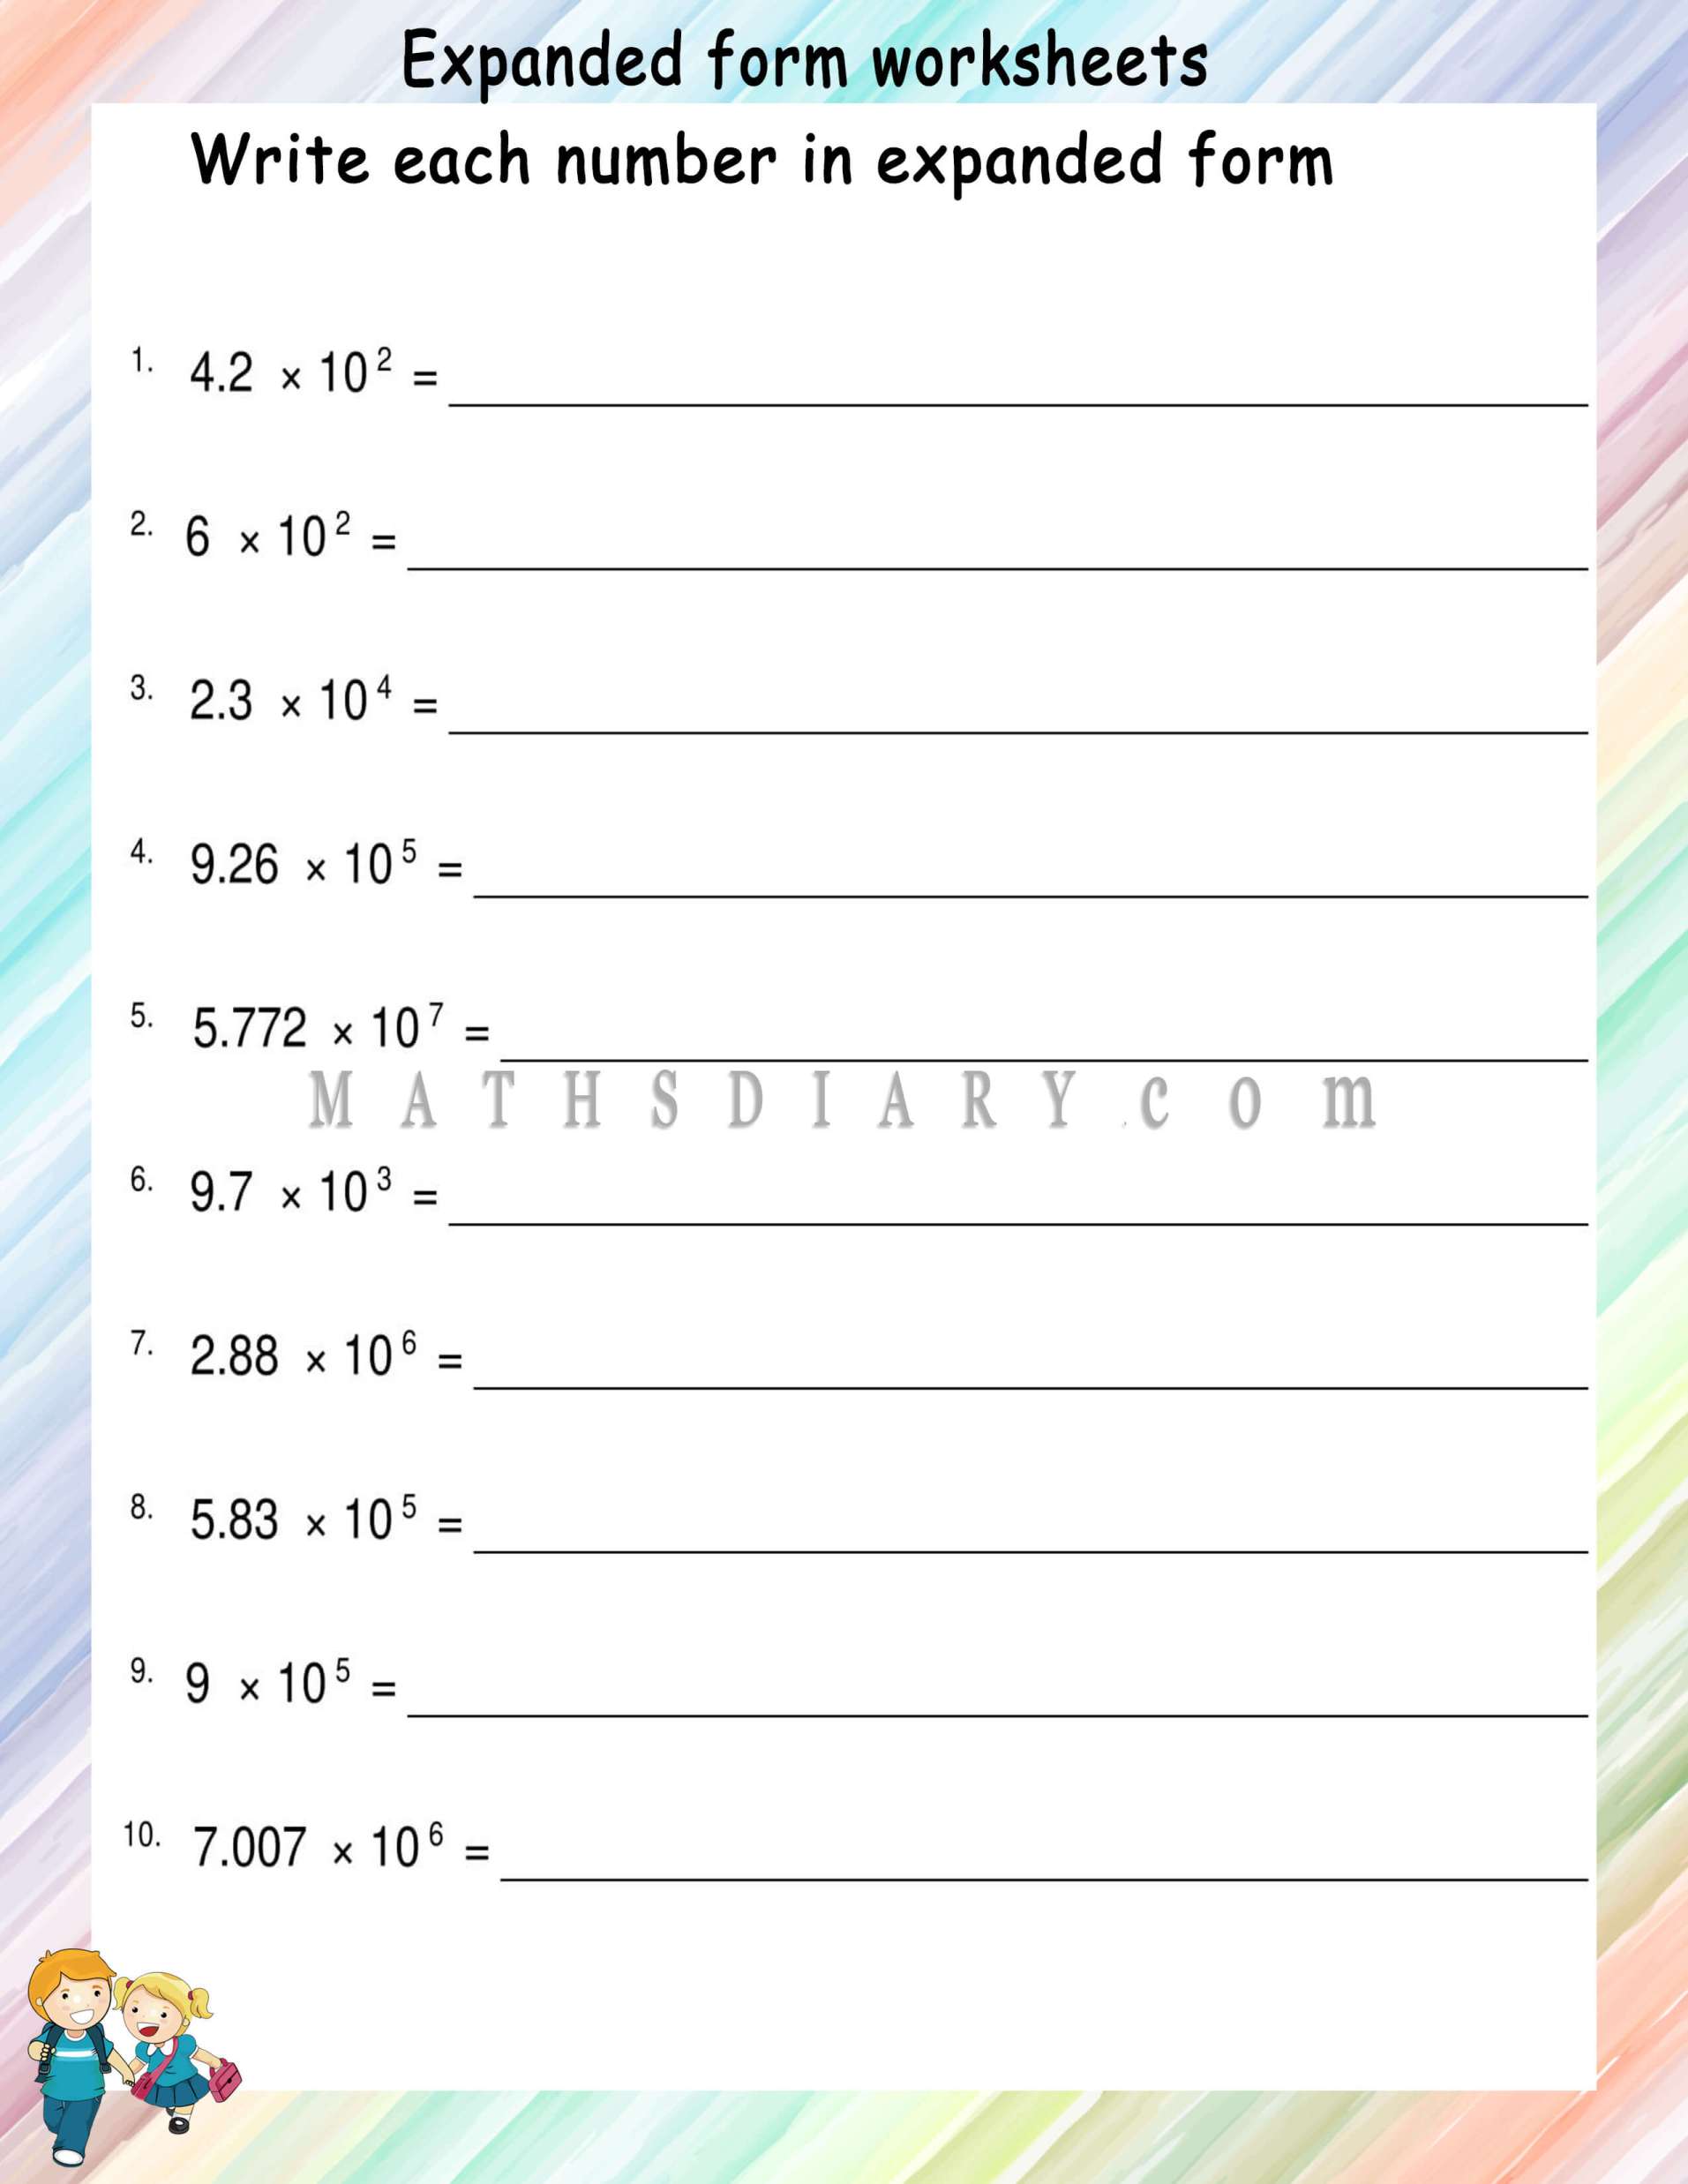 place-value-worksheet-up-to-10-million-decimals-in-standard-and-expanded-form-worksheets